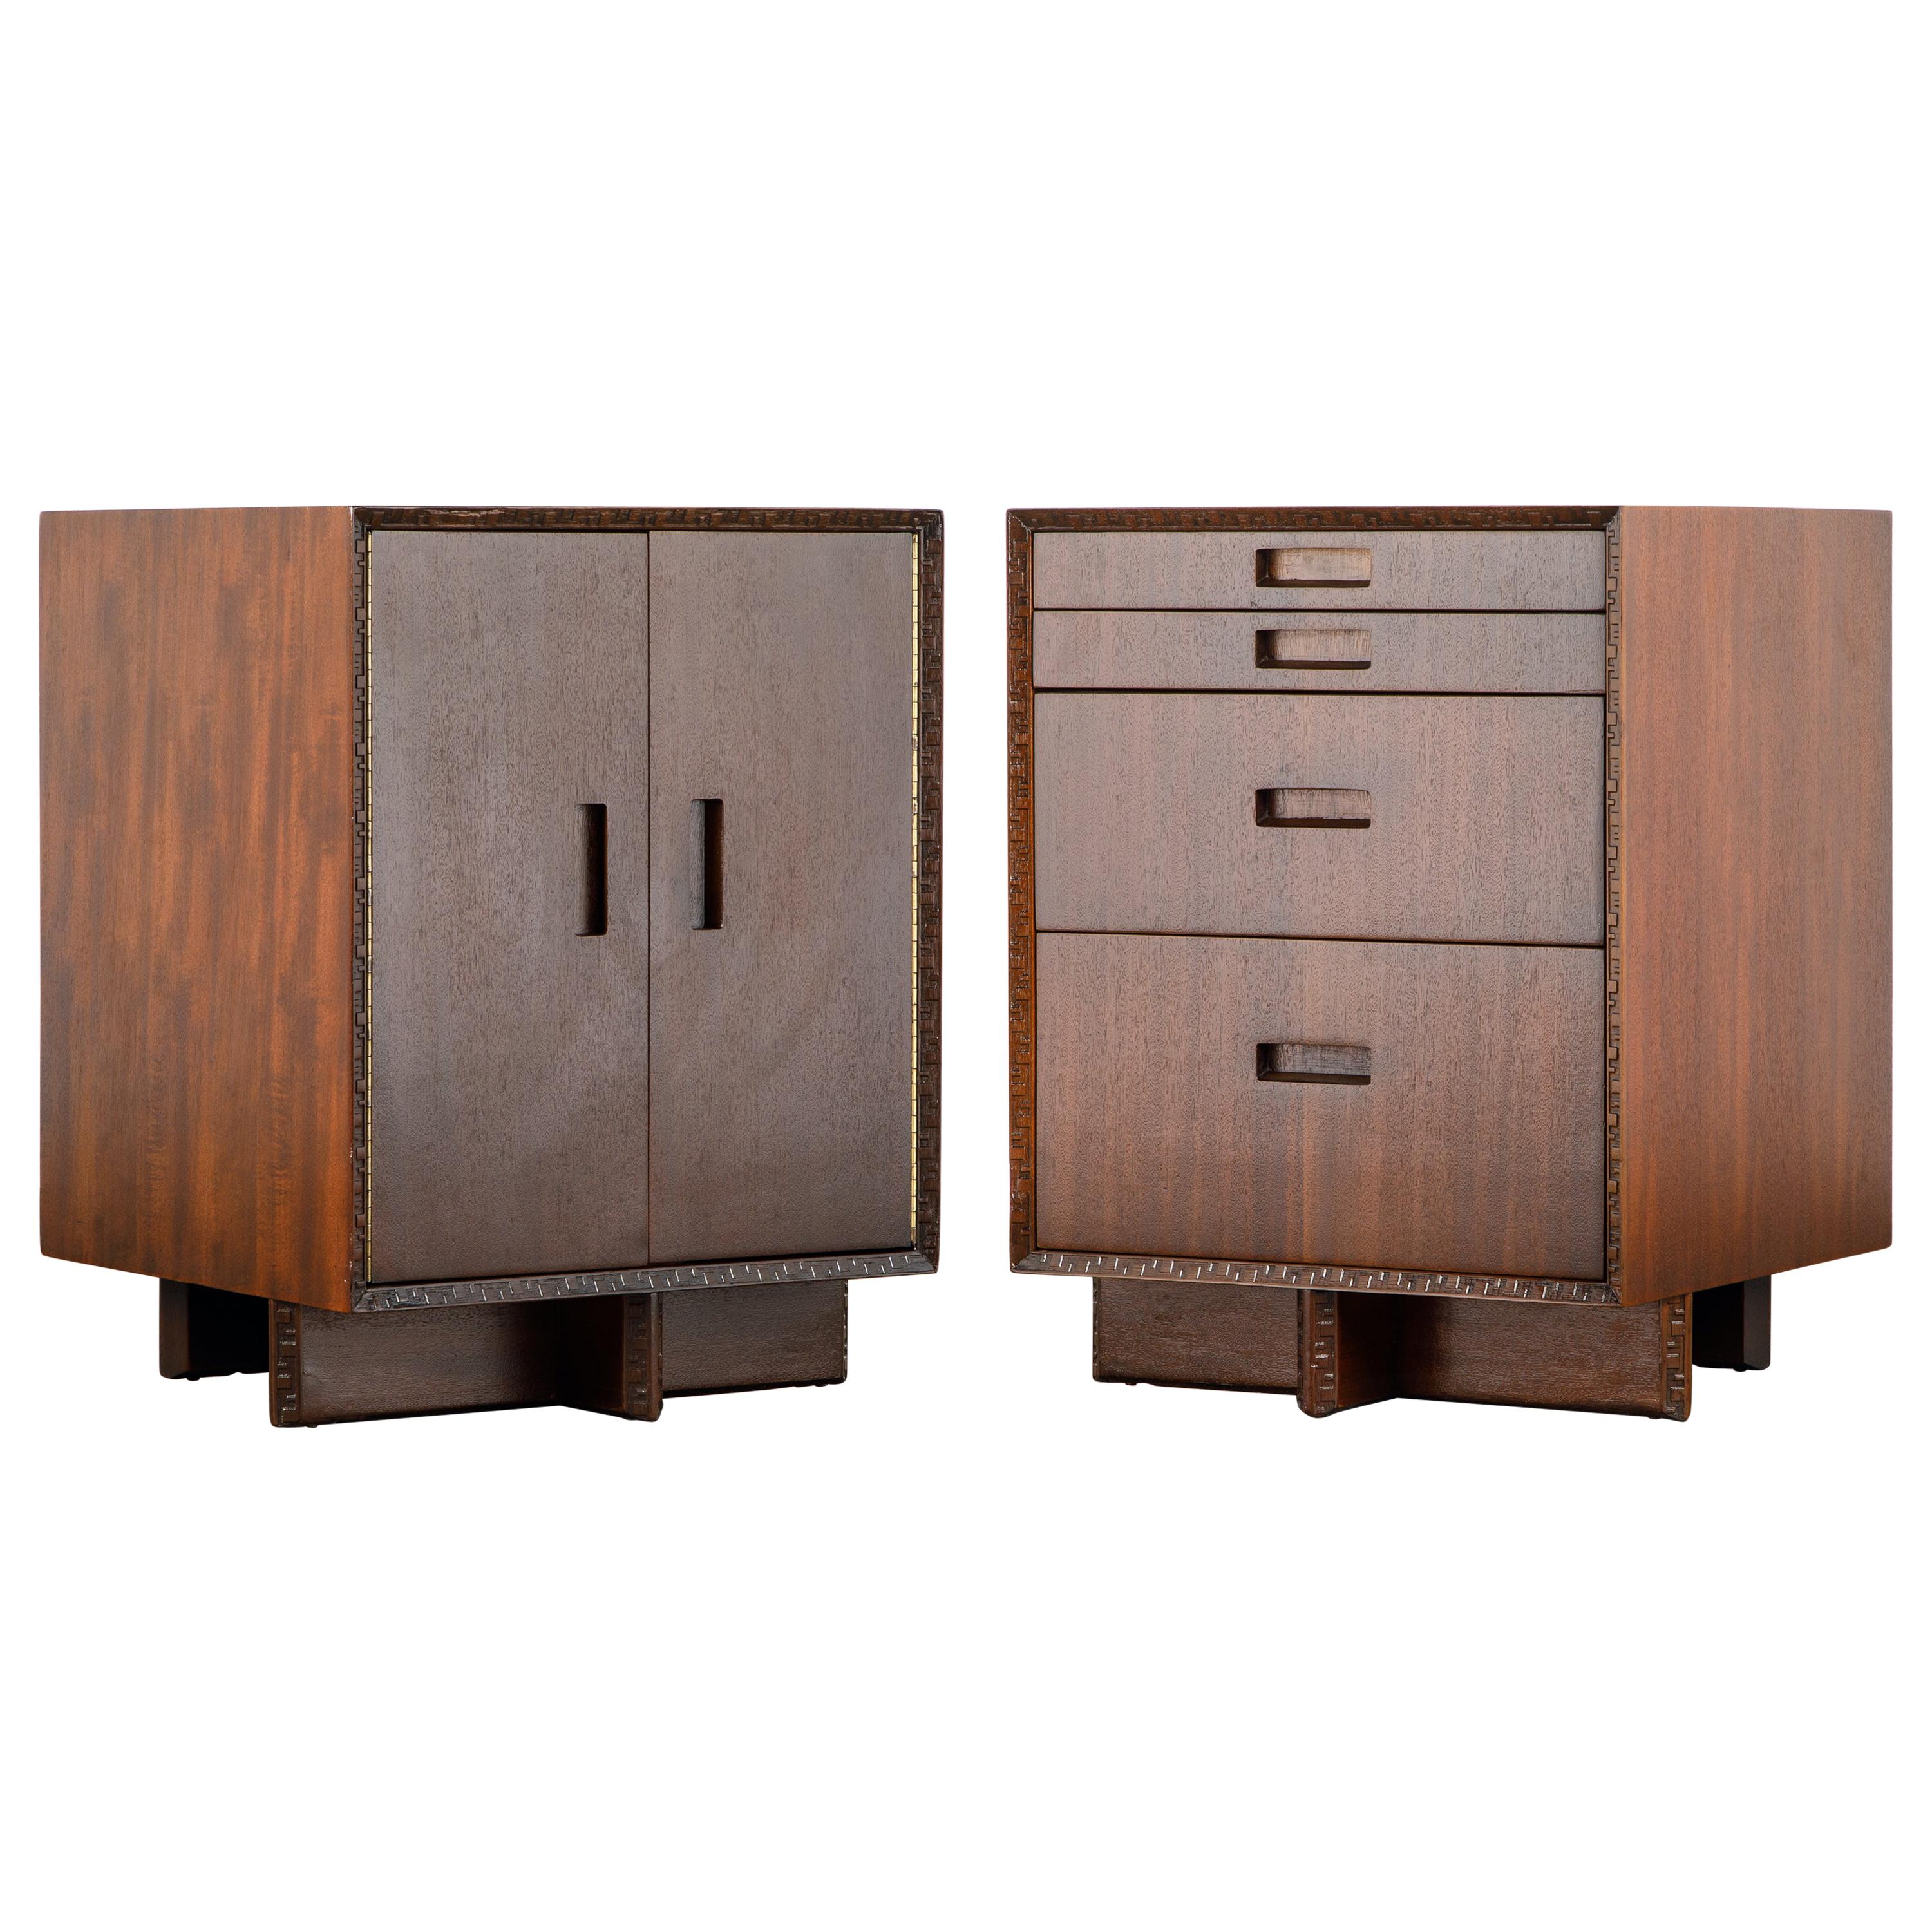 'Taliesin' Collection Mahogany Cabinets by Frank Lloyd Wright, 1955, Signed